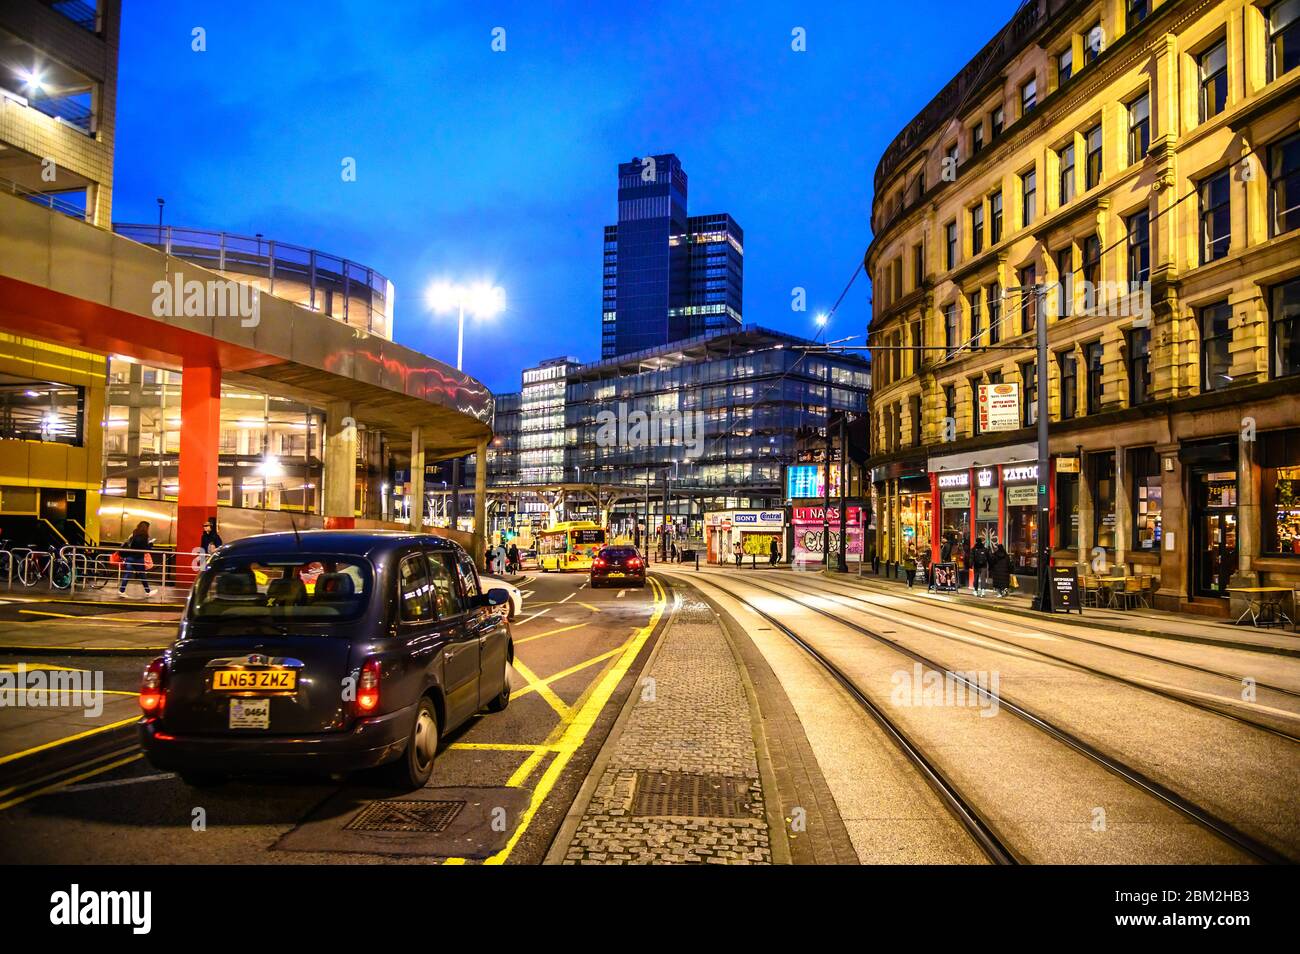 MANCHESTER, ENGLAND - NOVEMBER 10, 2019: City centre of Manchester in UK Stock Photo